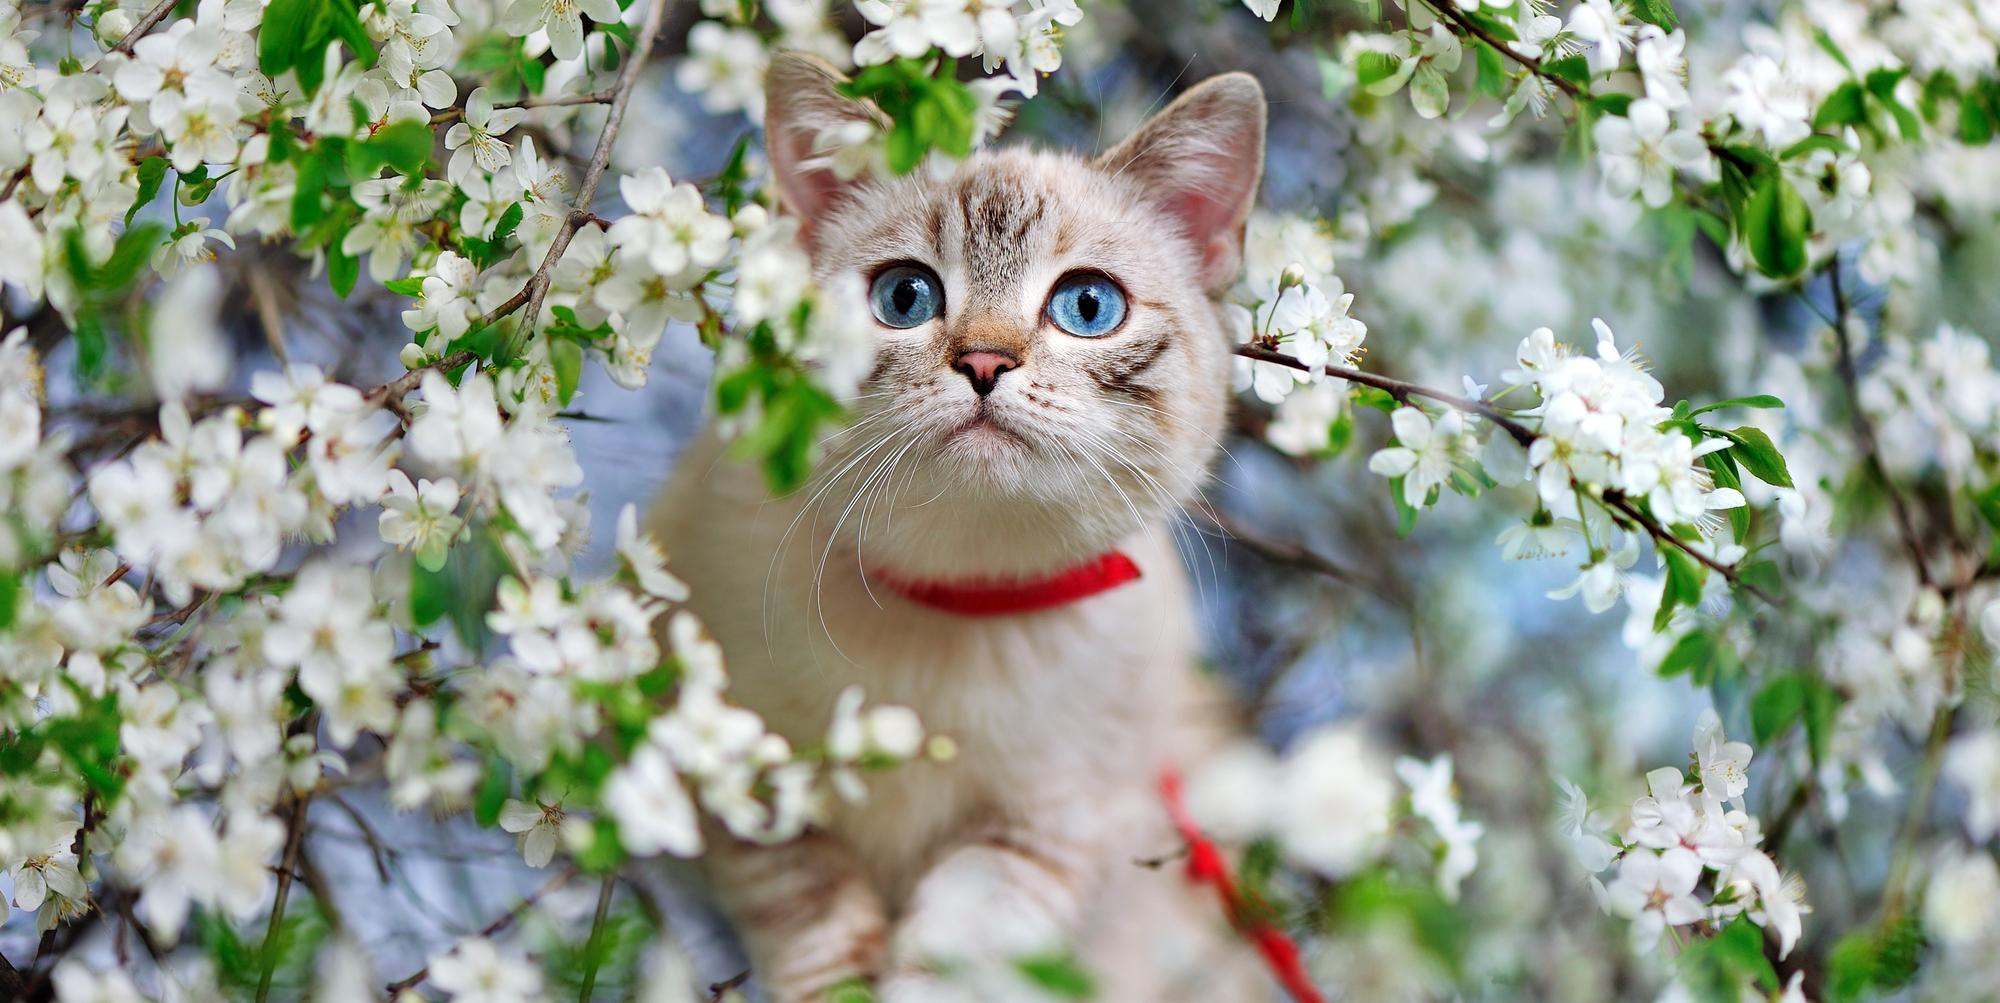 is cherry blossom poisonous to dogs